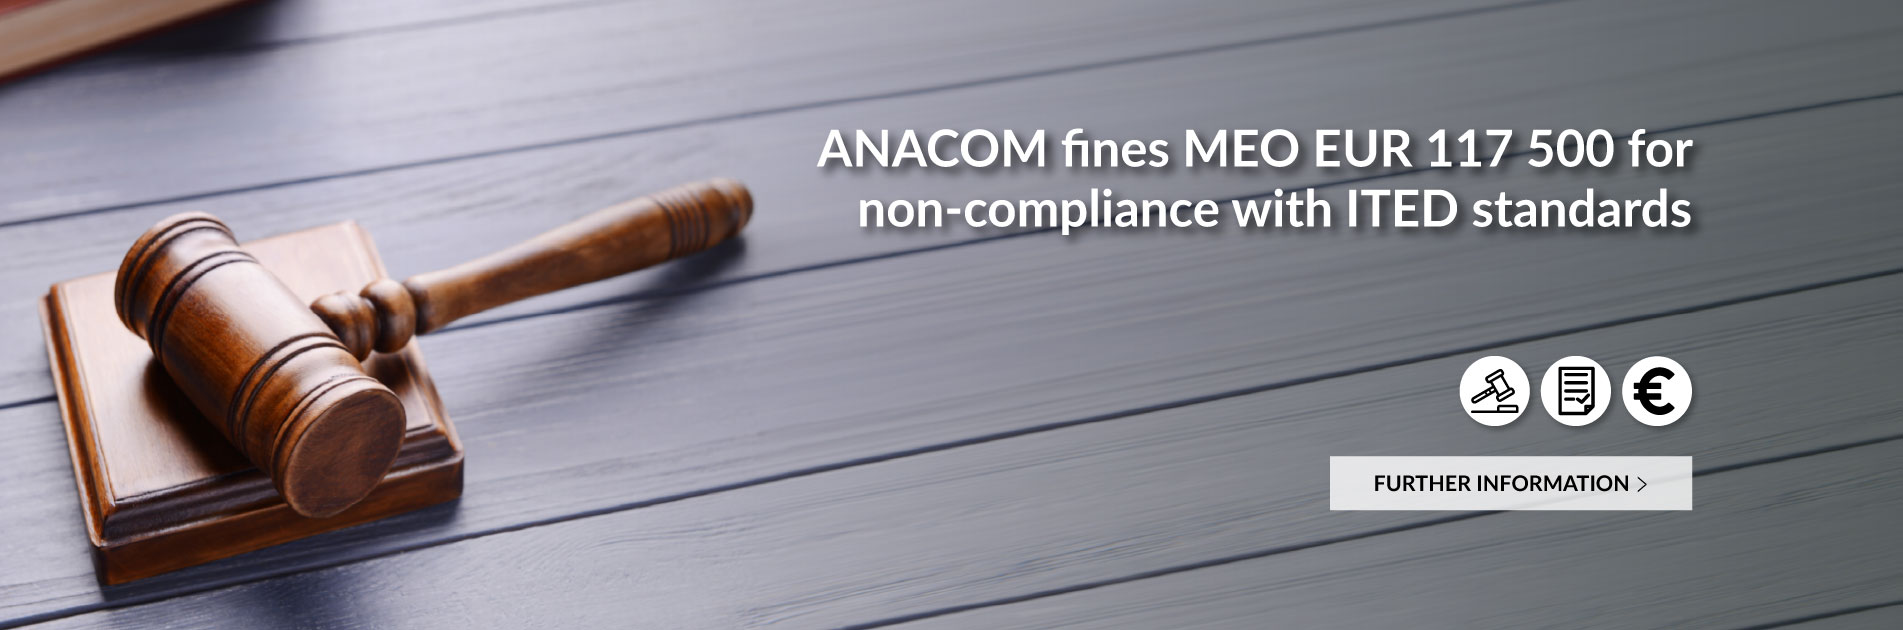 ANACOM fines MEO EUR 117 500 for non-compliance with ITED standards